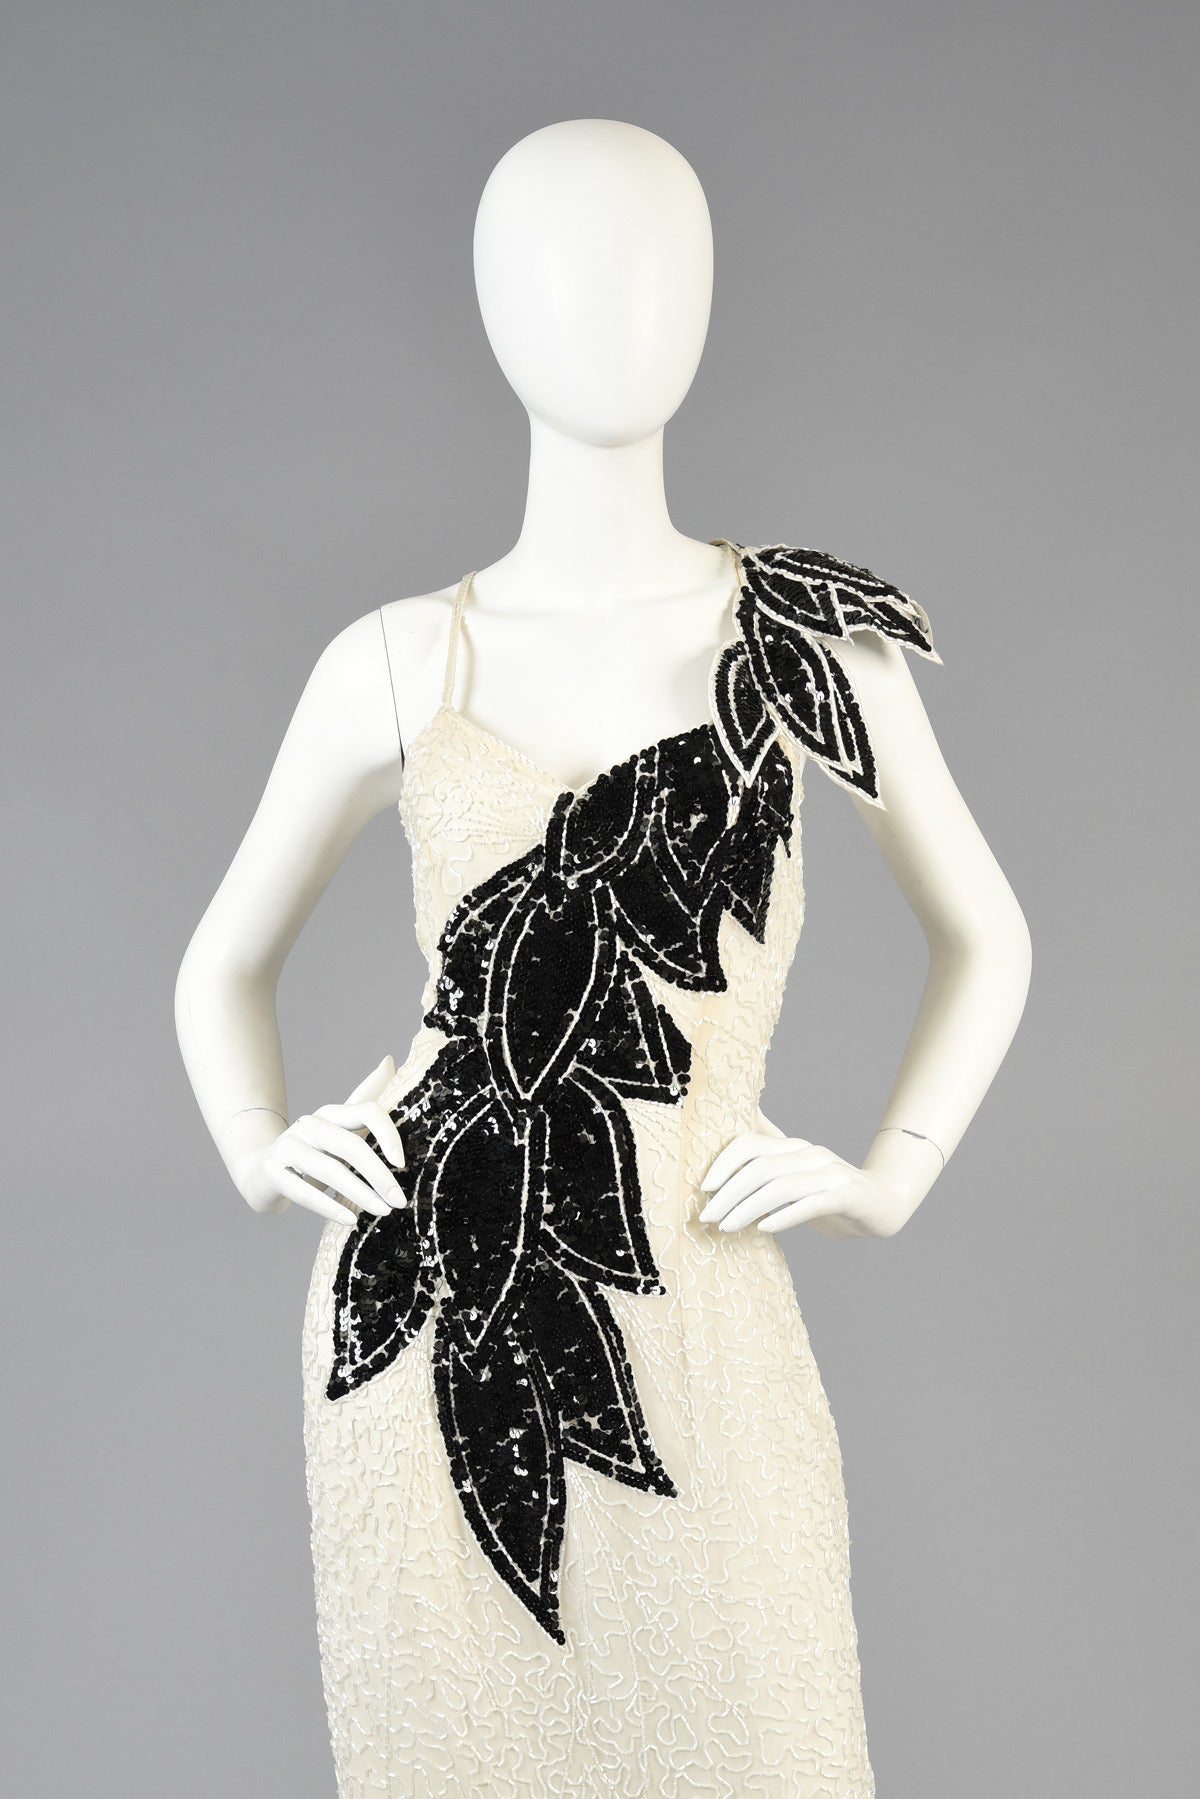 Beige Lillie Rubin Black and White Beaded Gown with Architectural Leaves For Sale